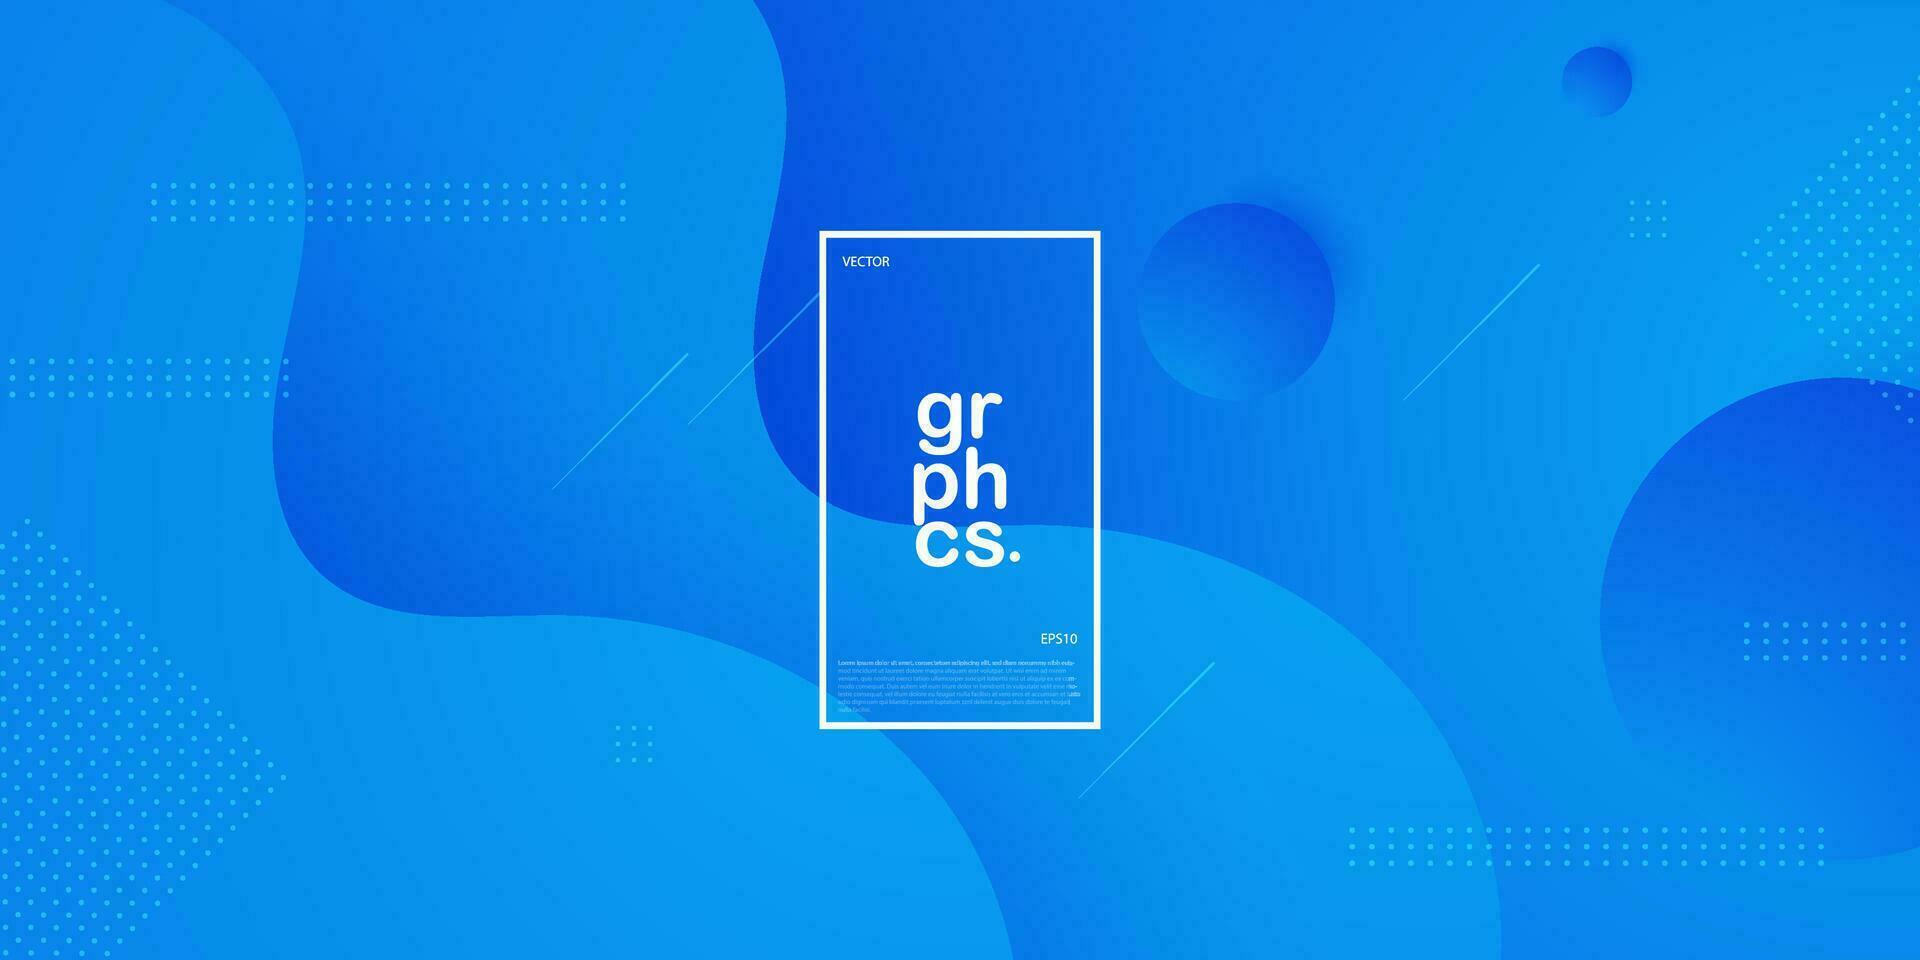 Colorful gradient blue background with geometric wave and circle shapes elements. Colorful blue wave design. Simple elegant concept. Eps10 vector